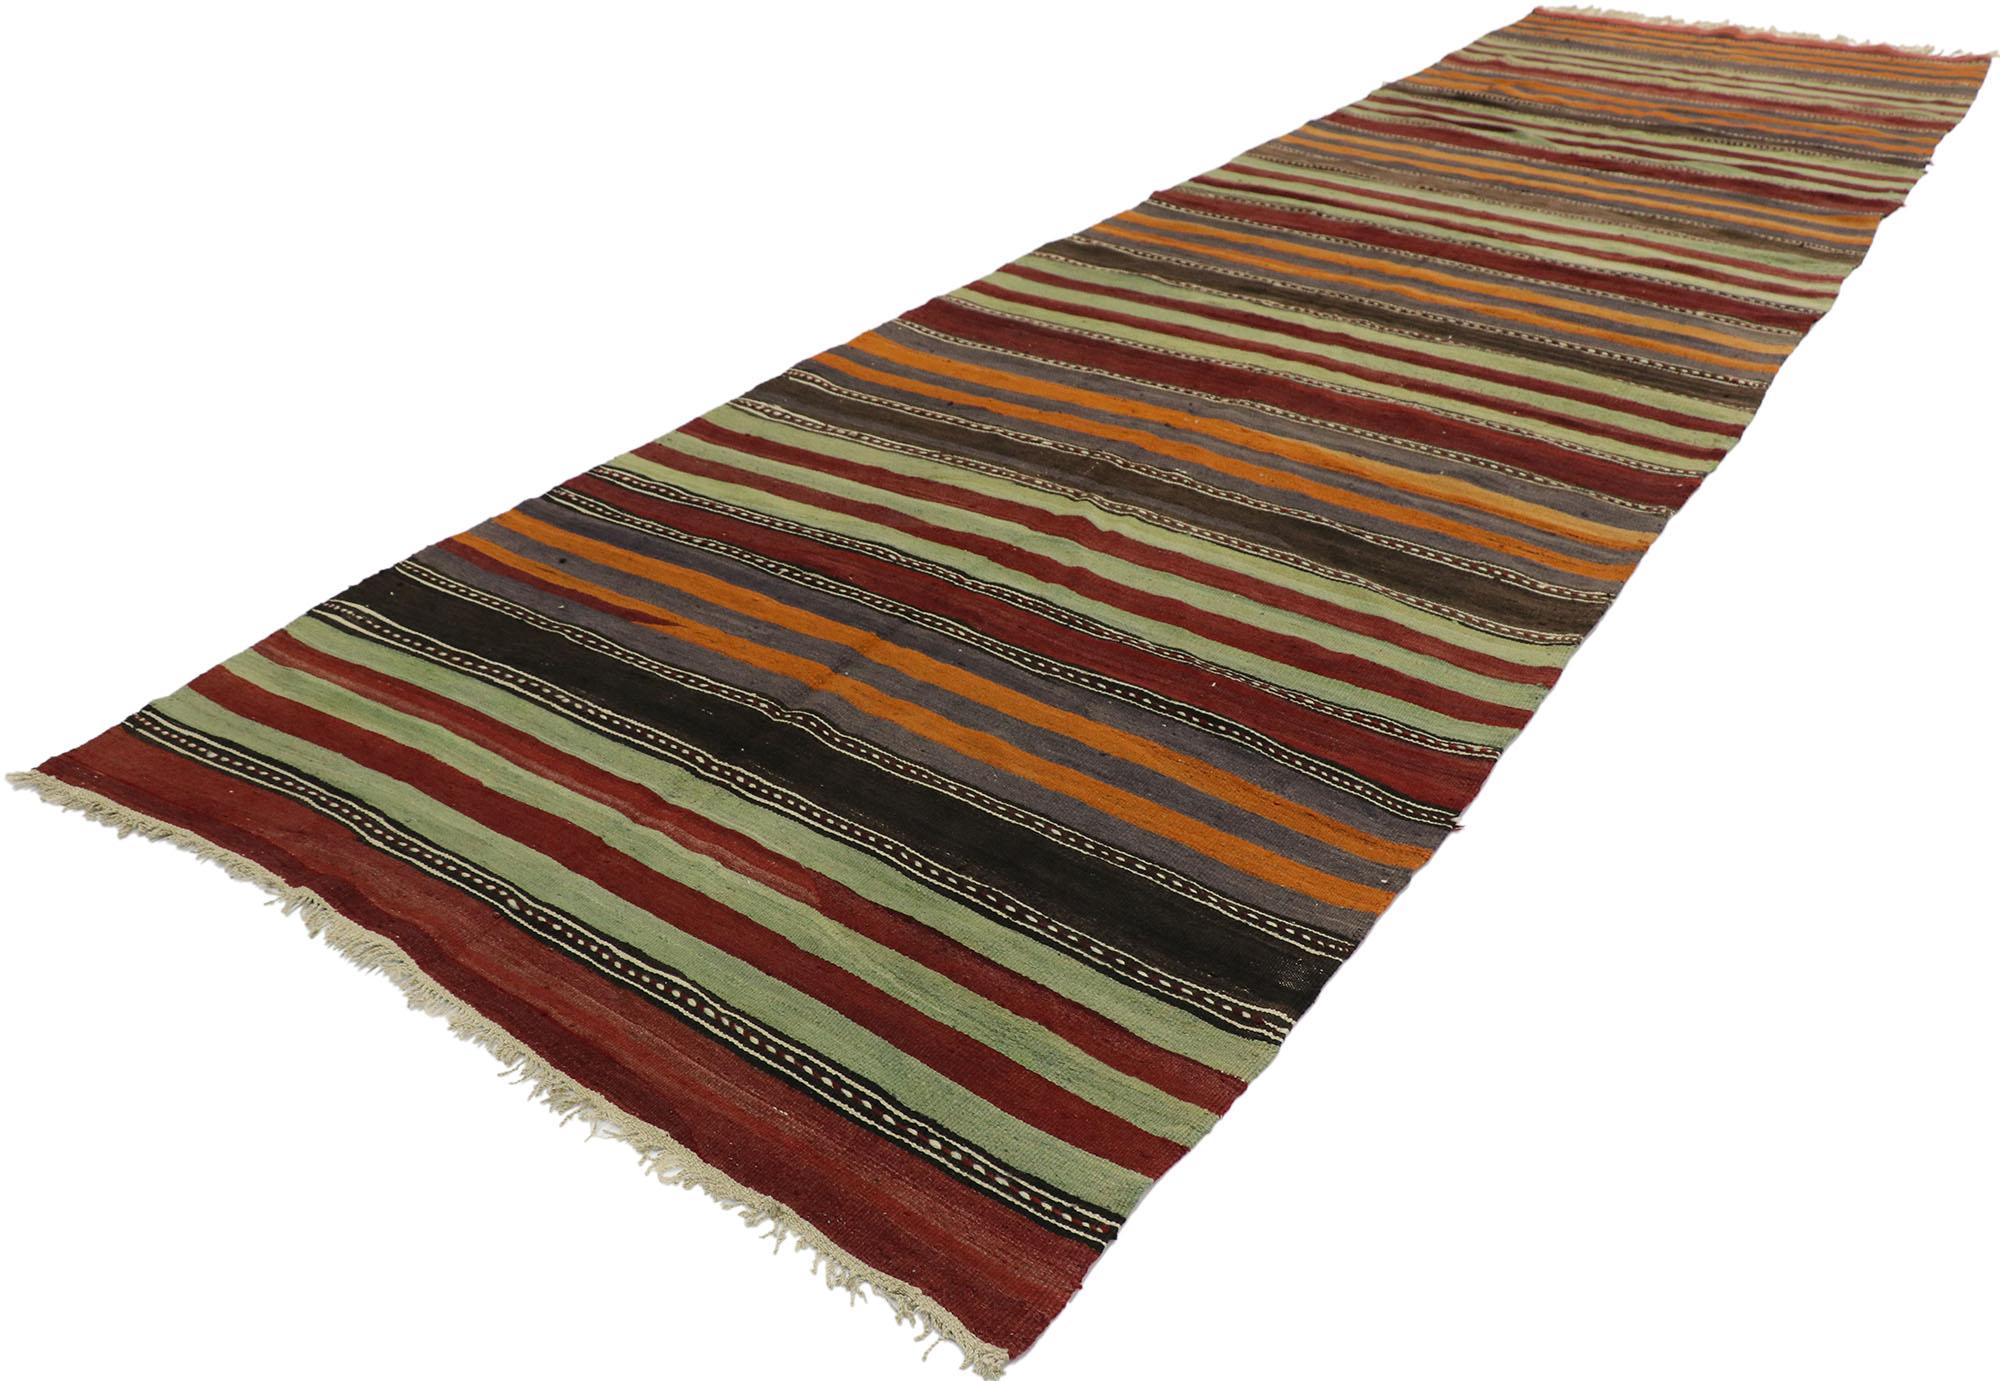 53129, vintage Turkish striped Kilim runner with modern cabin style. With its warm hues and rugged beauty, this hand-woven wool striped kilim runner manages to meld contemporary, modern, and traditional design elements. The flat-weave kilim rug